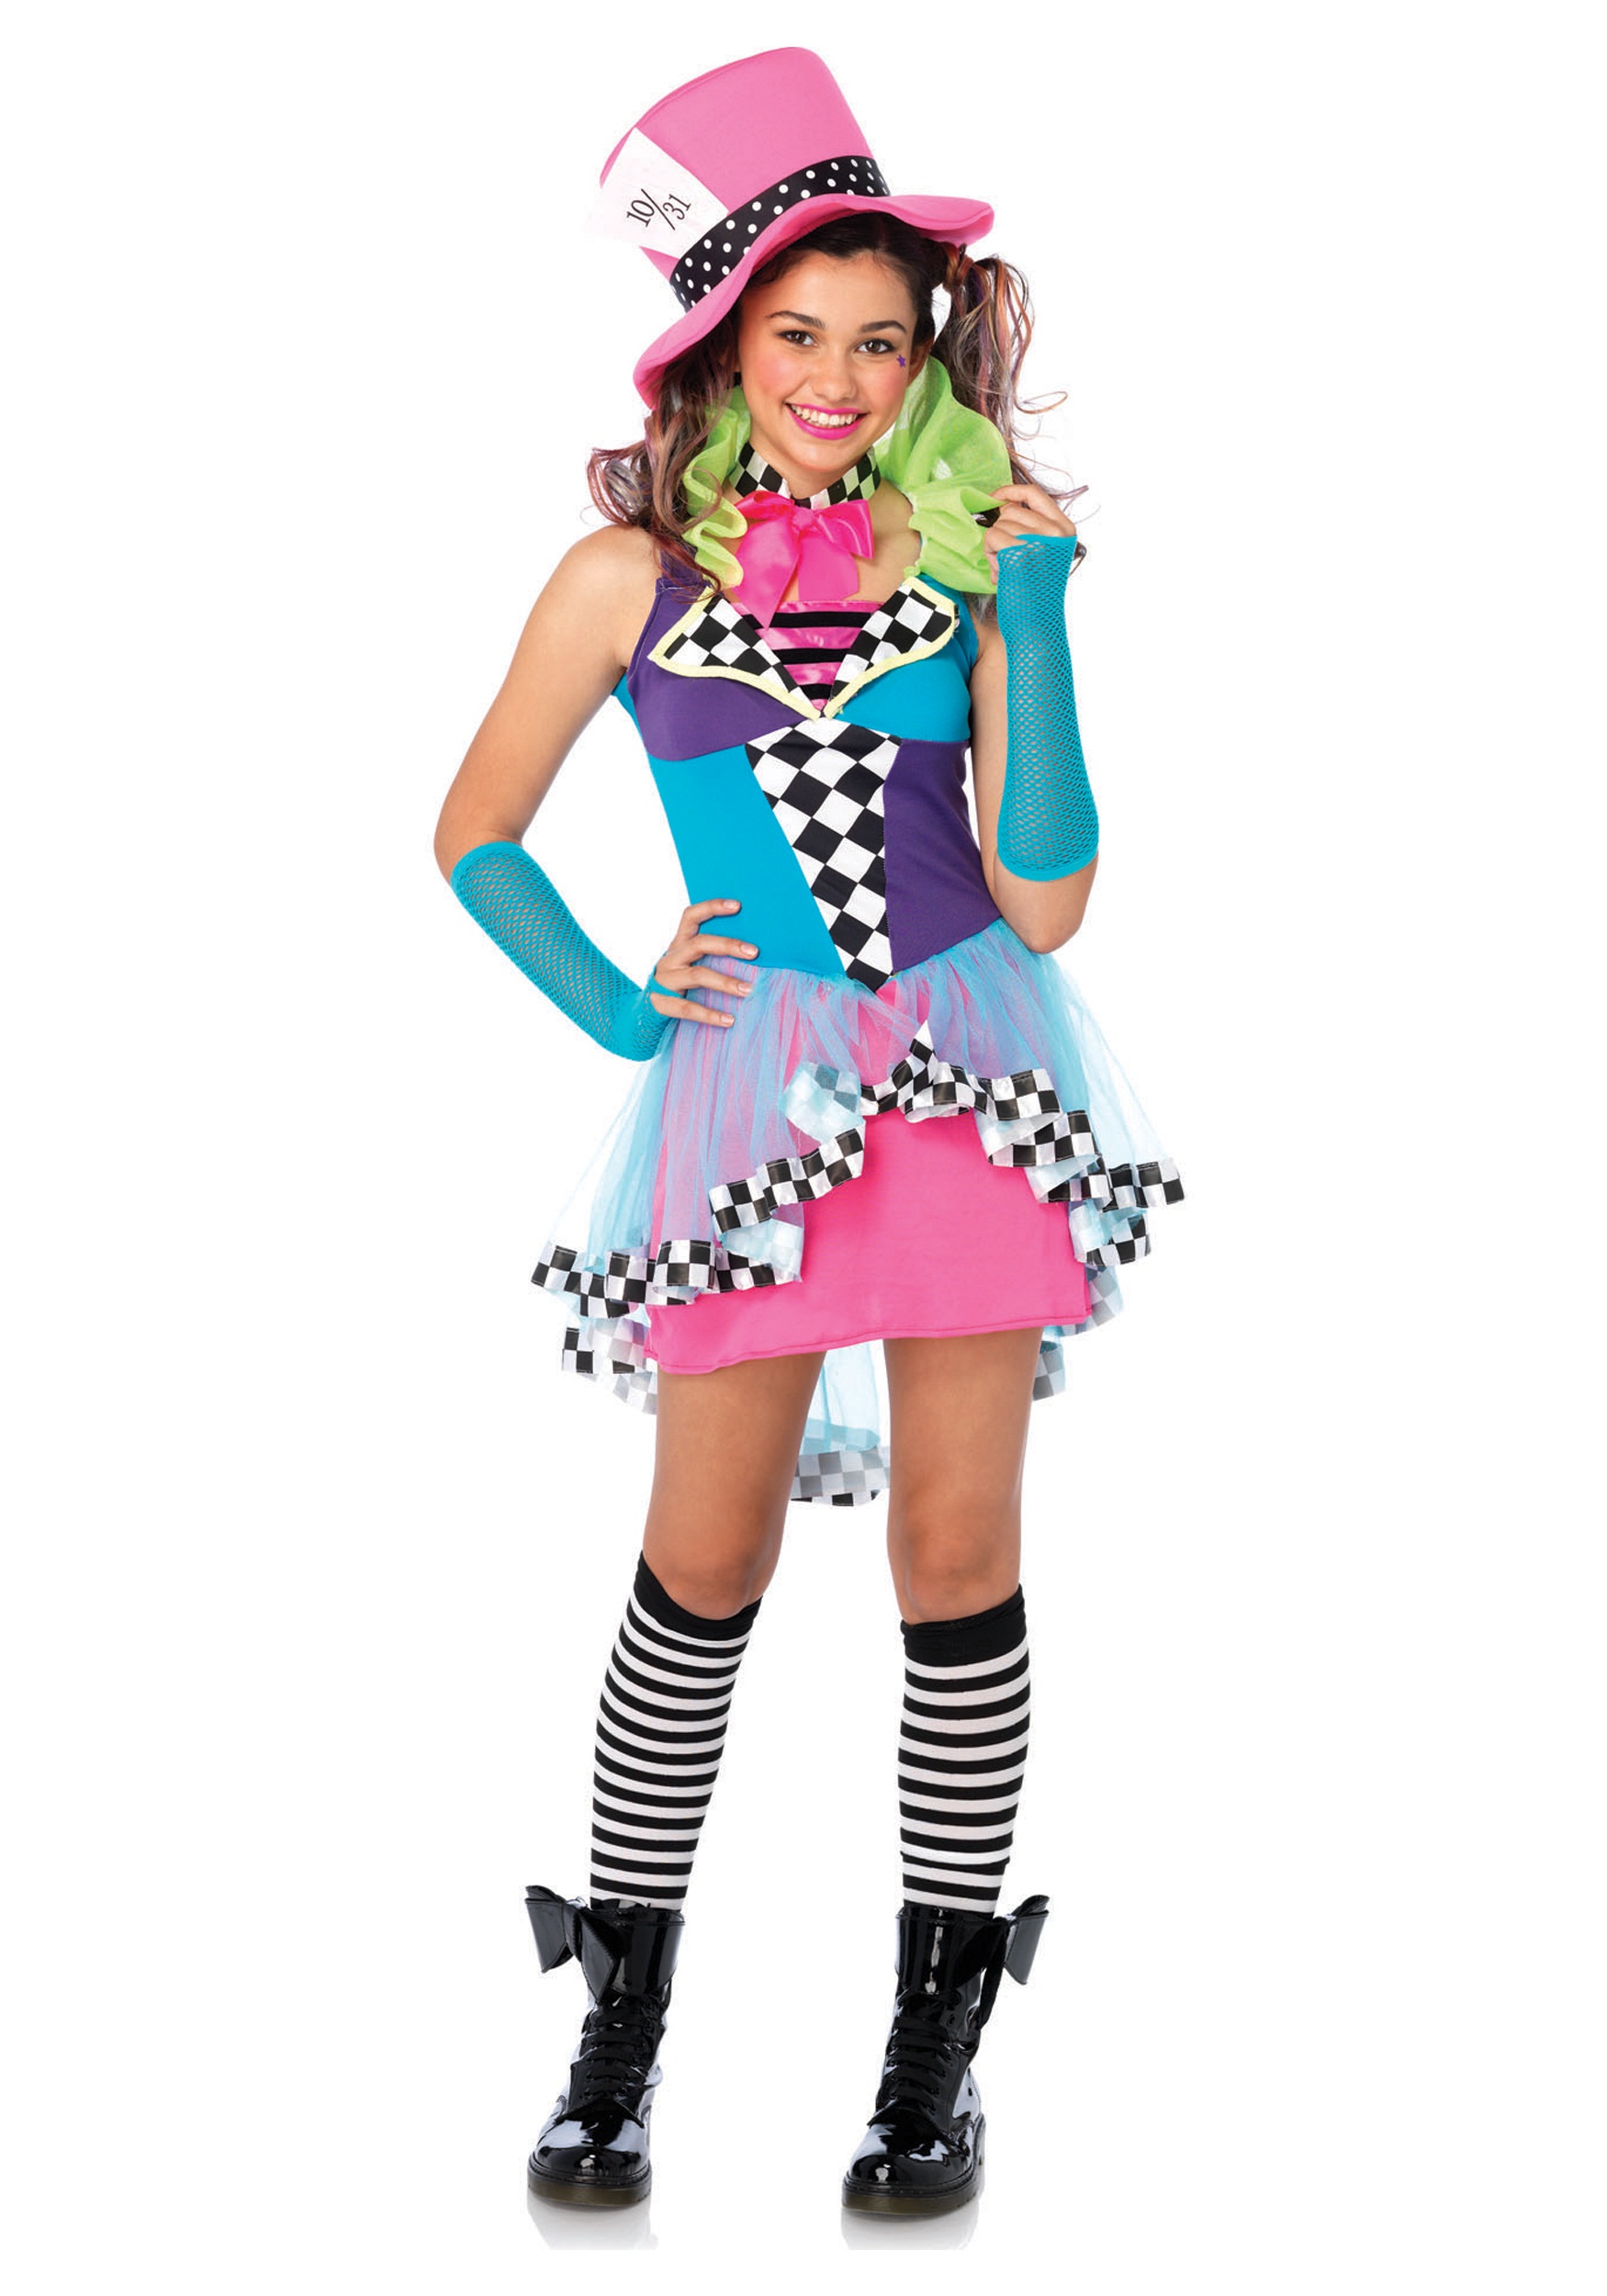 Tween Mayhem Hatter Costume | If you're a little more inclined to mayh...